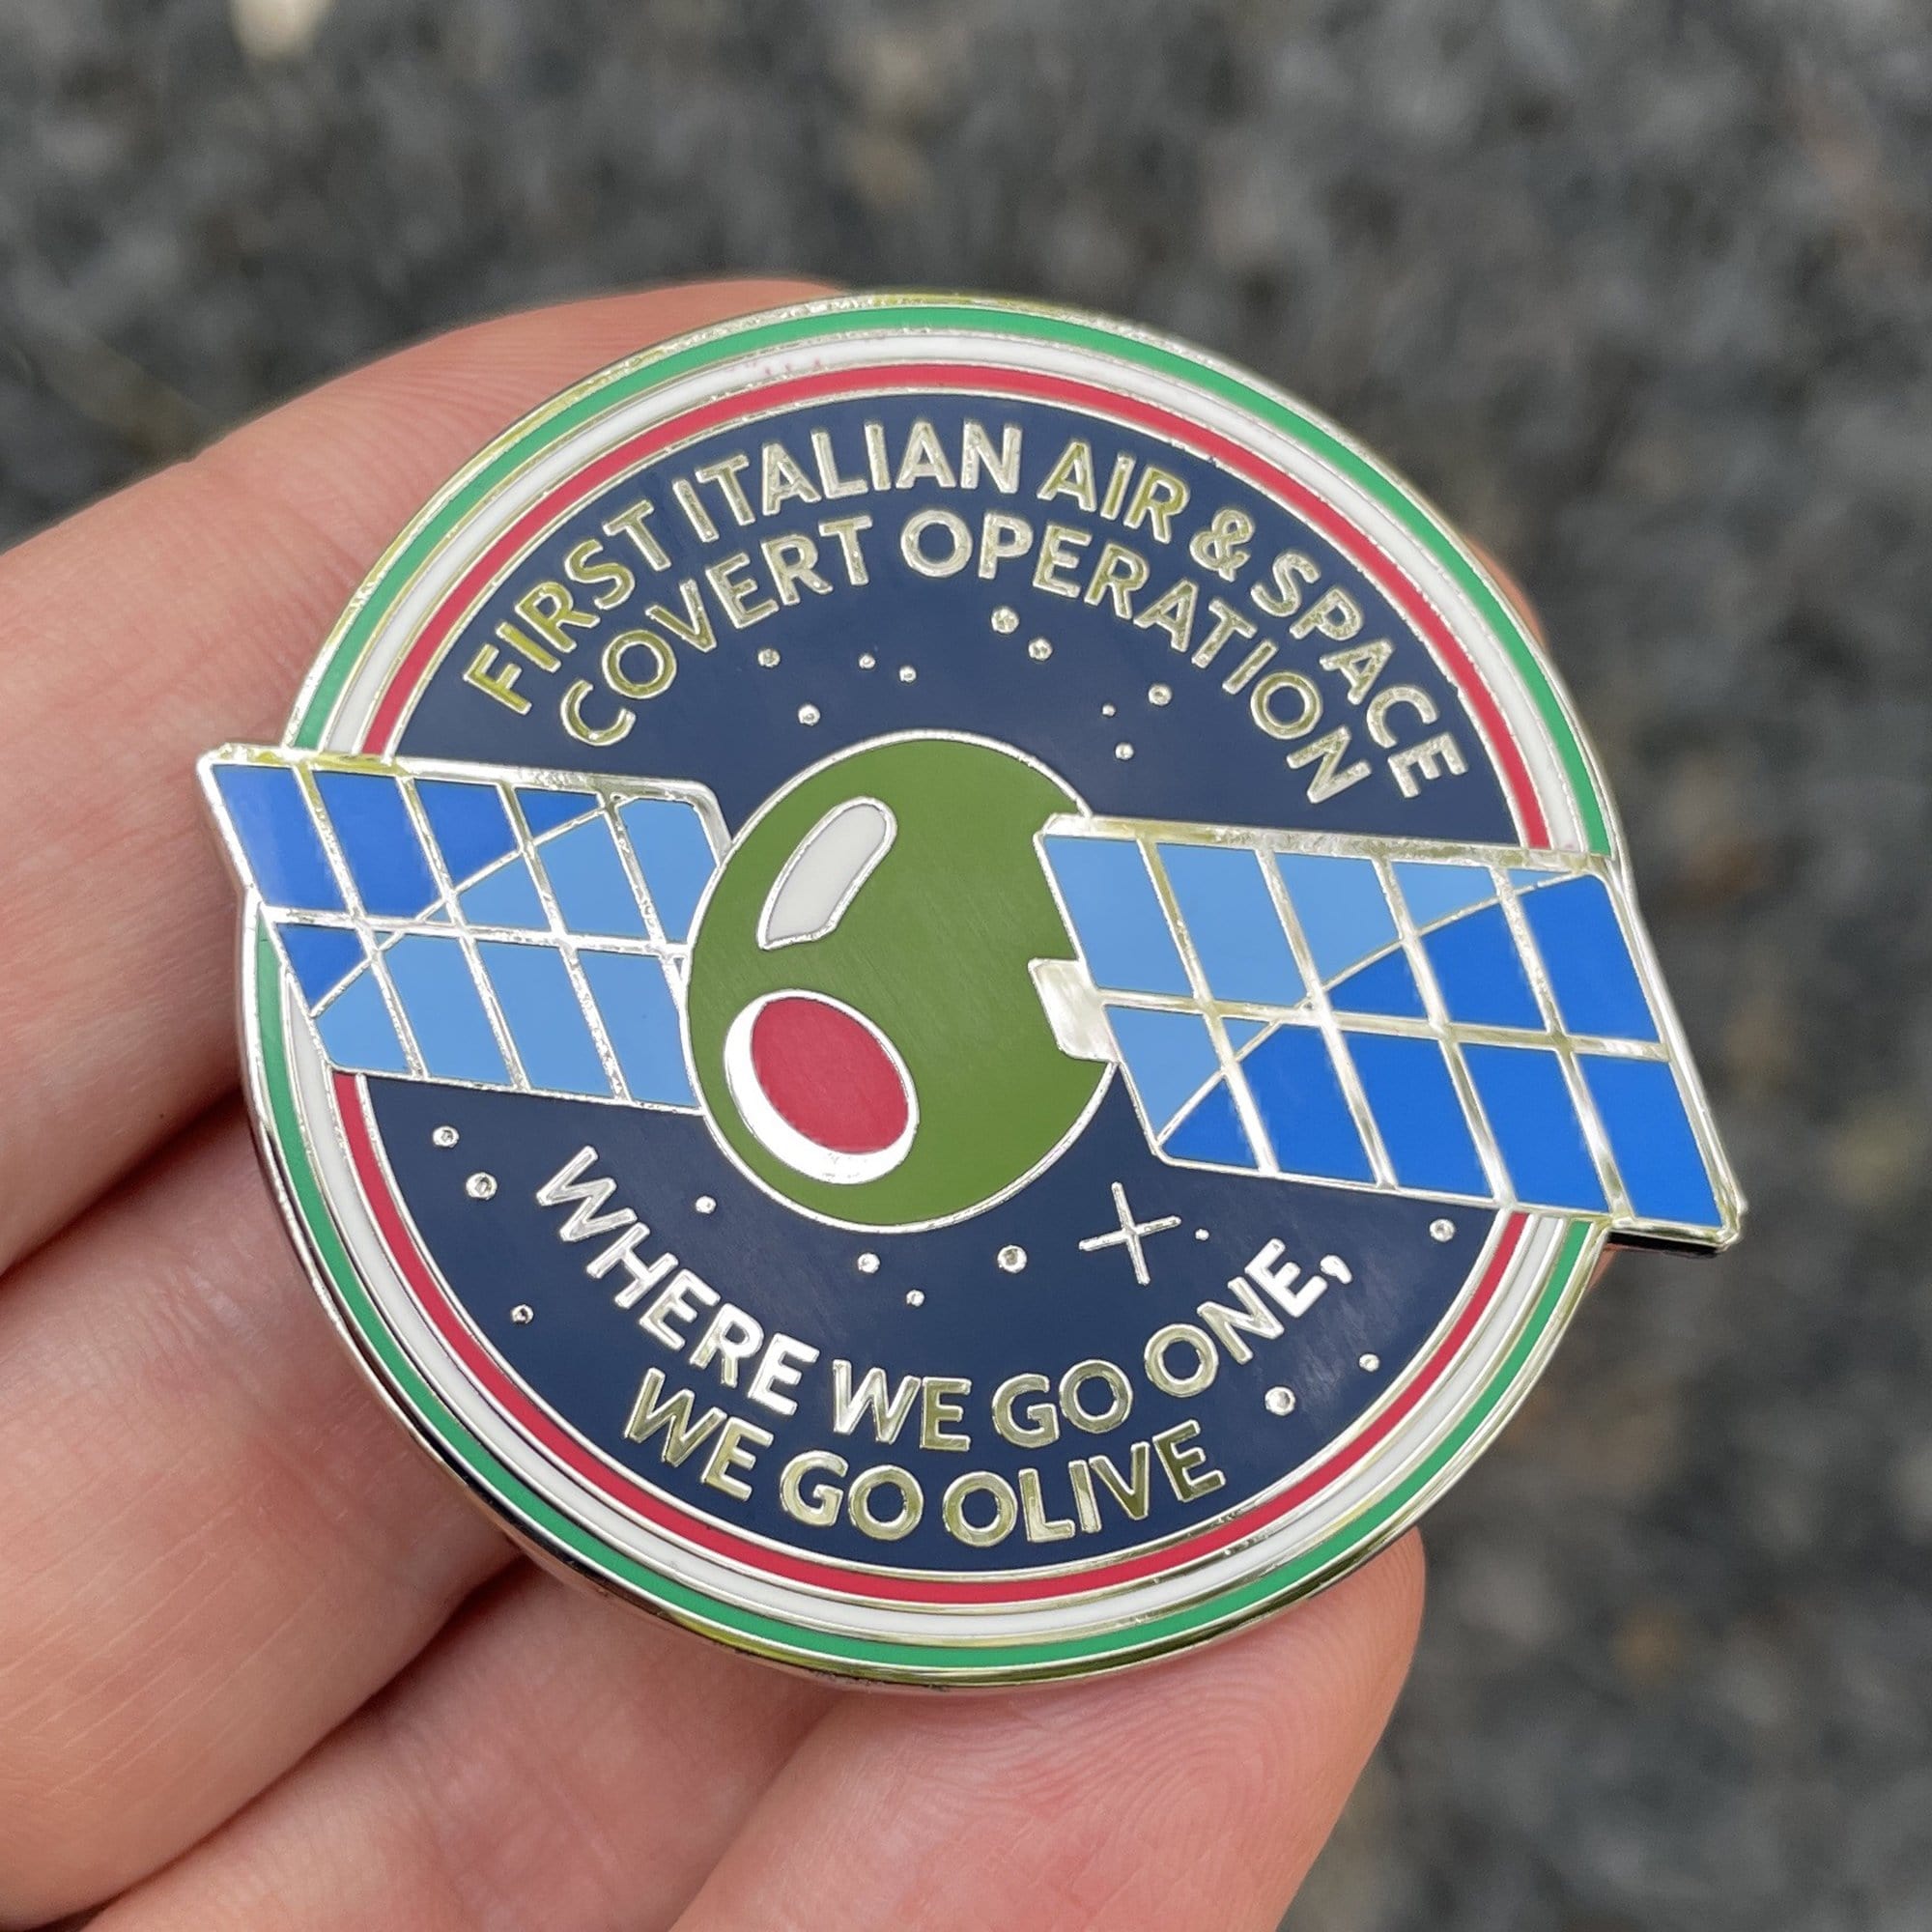 First Italian Air & Space Covert Operation Pin